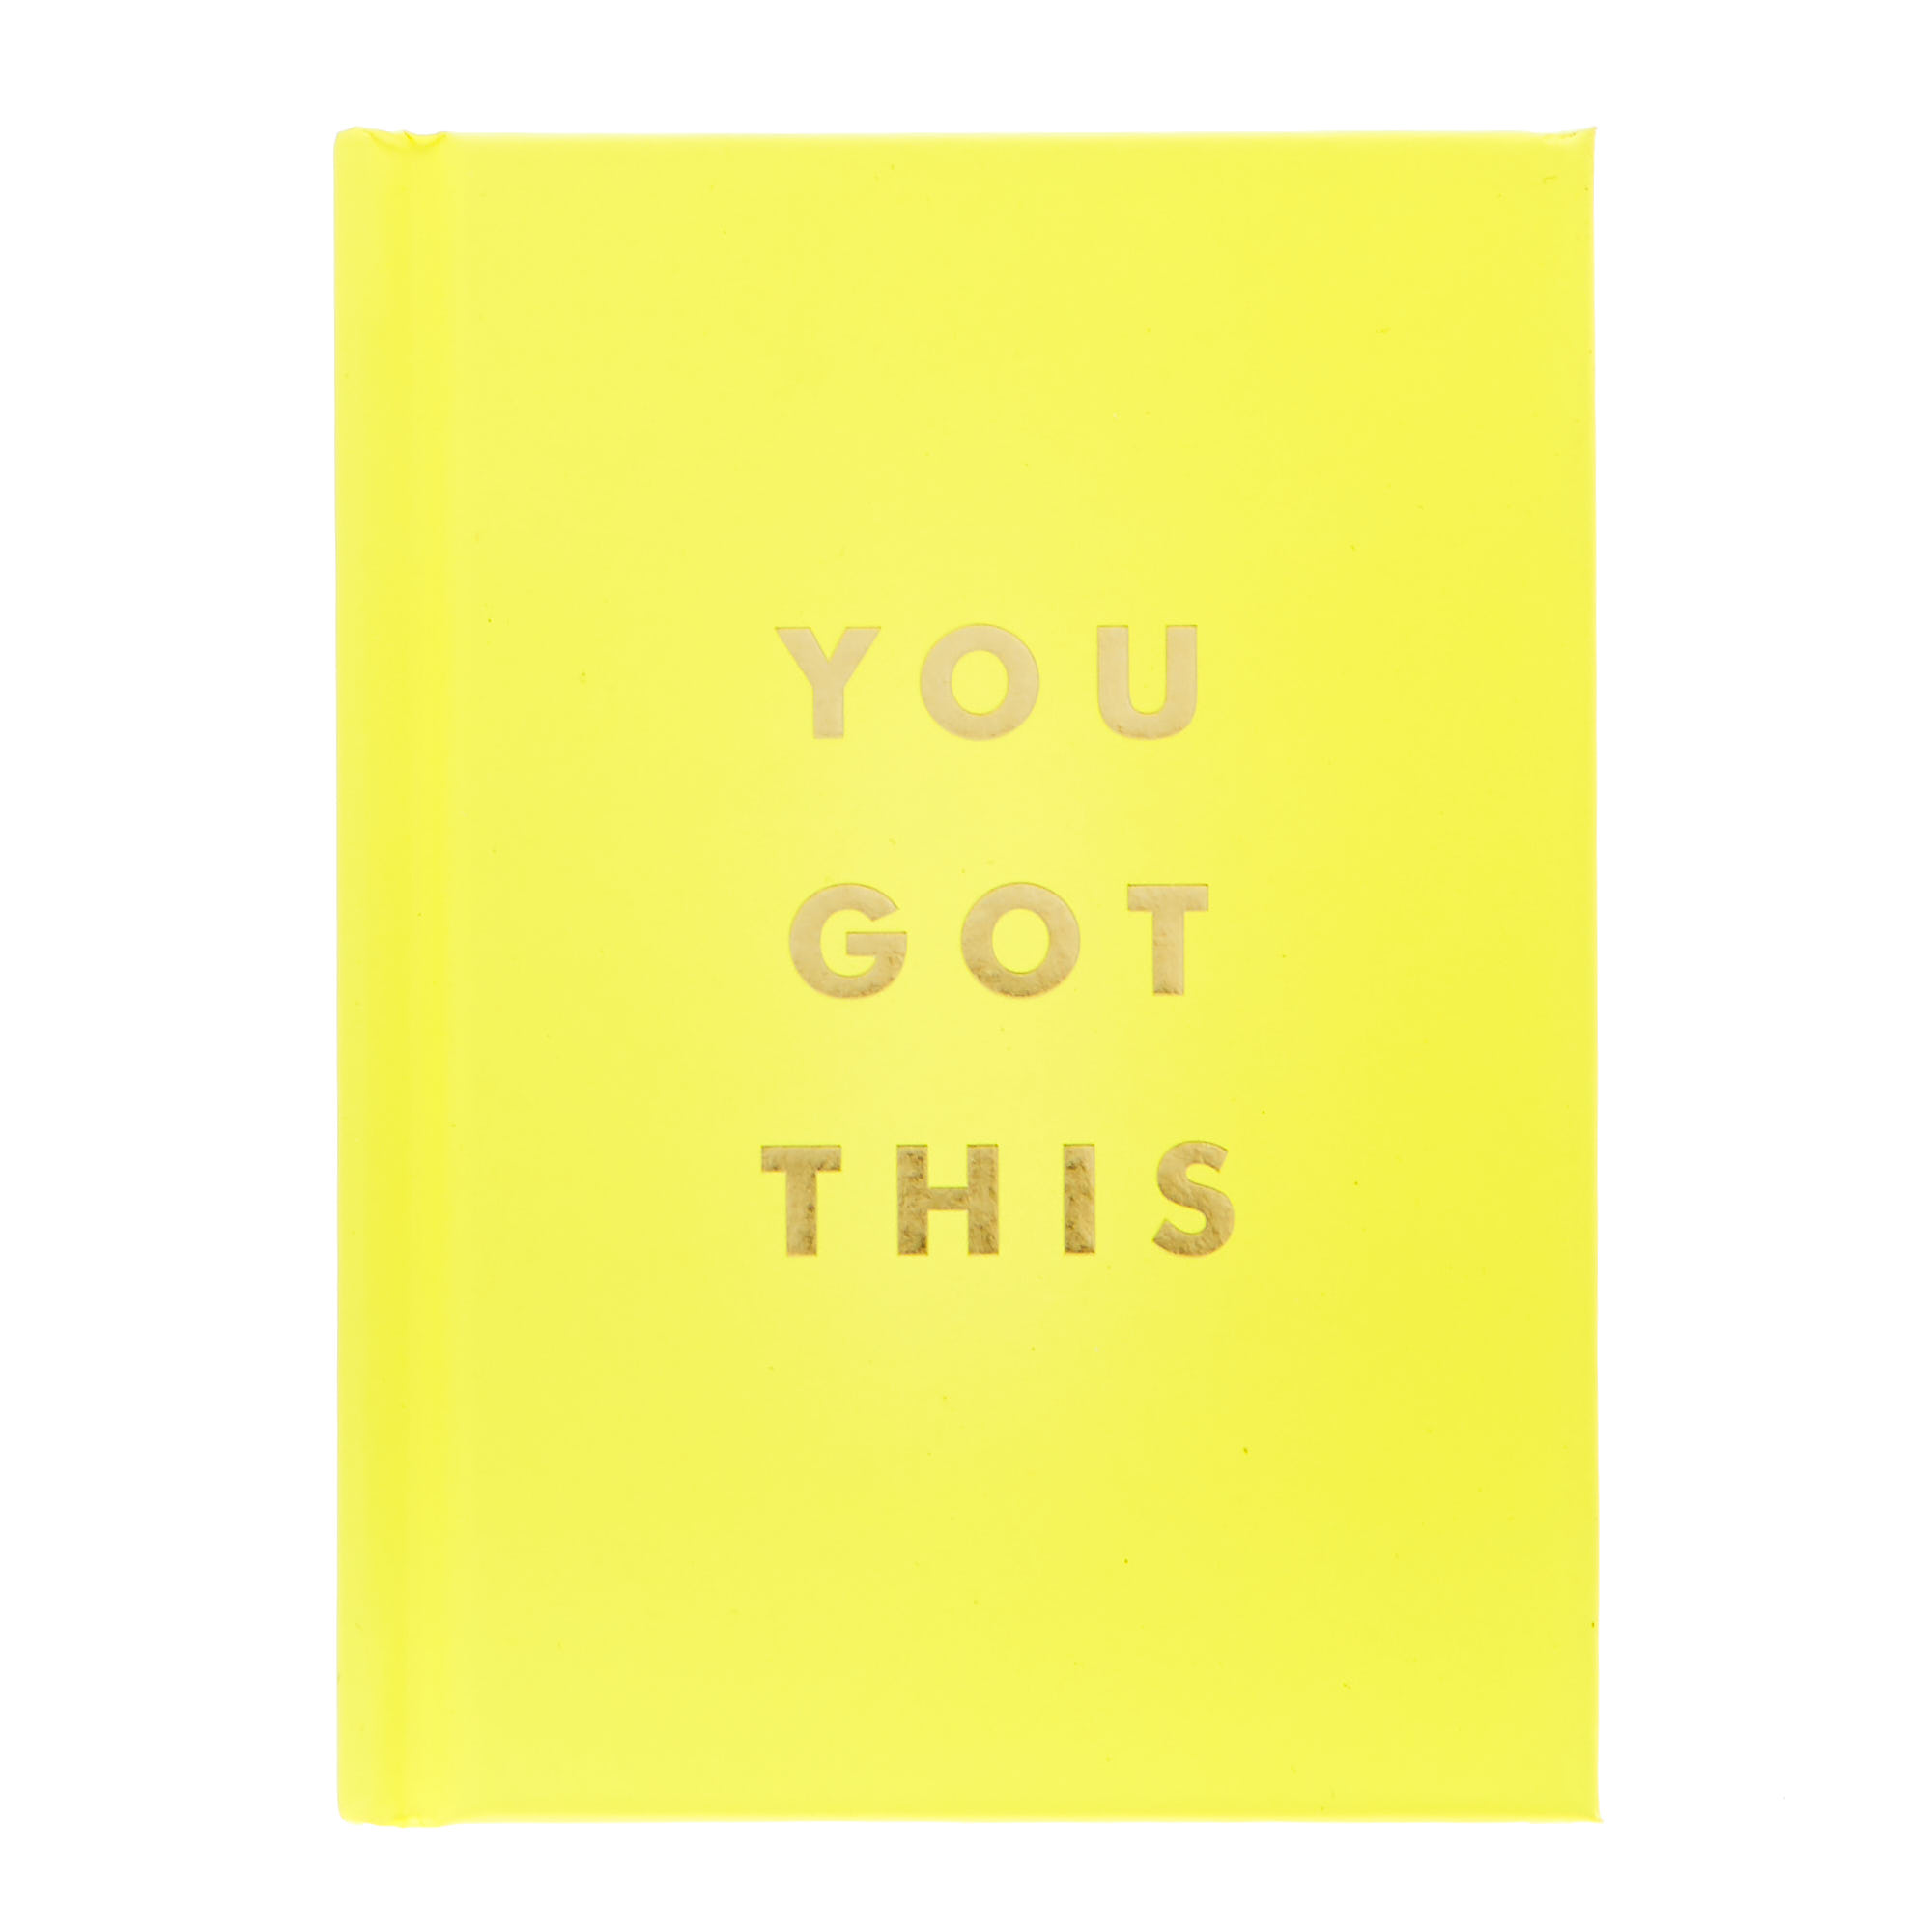 You Got This: Uplifting Quotes And Affirmations